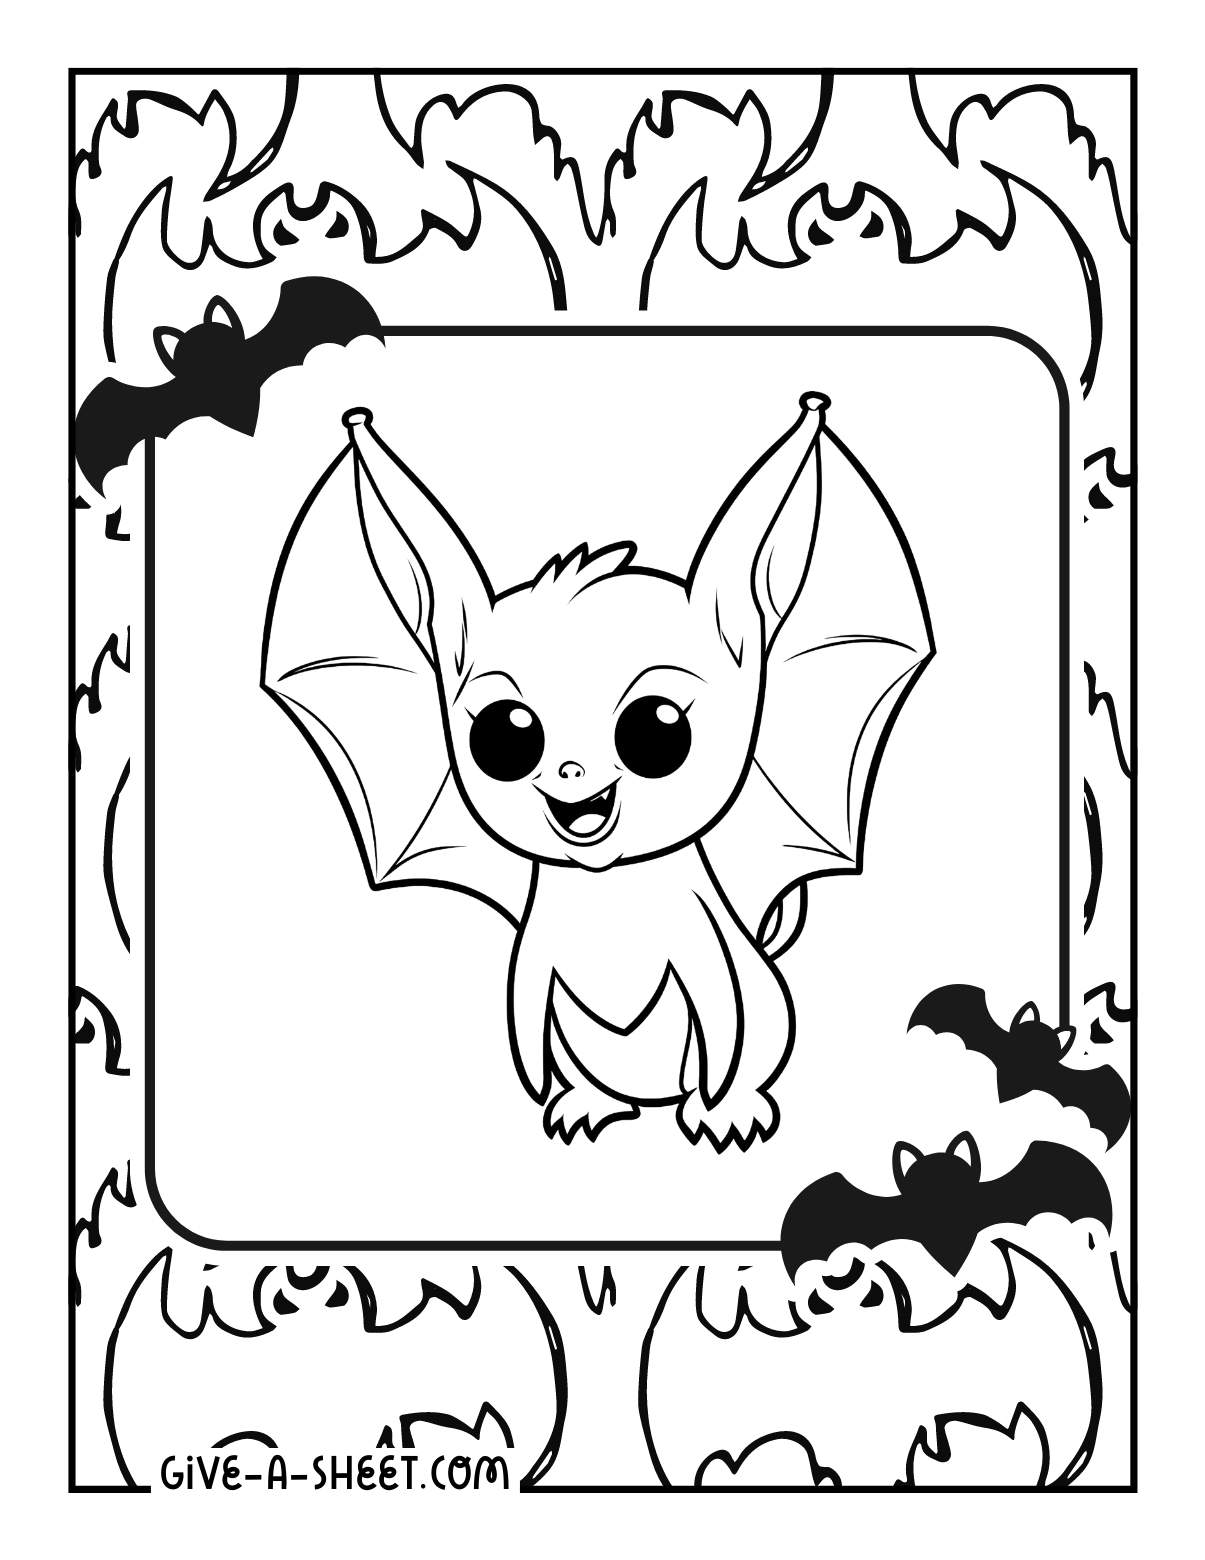 Cute bat great coloring pages.